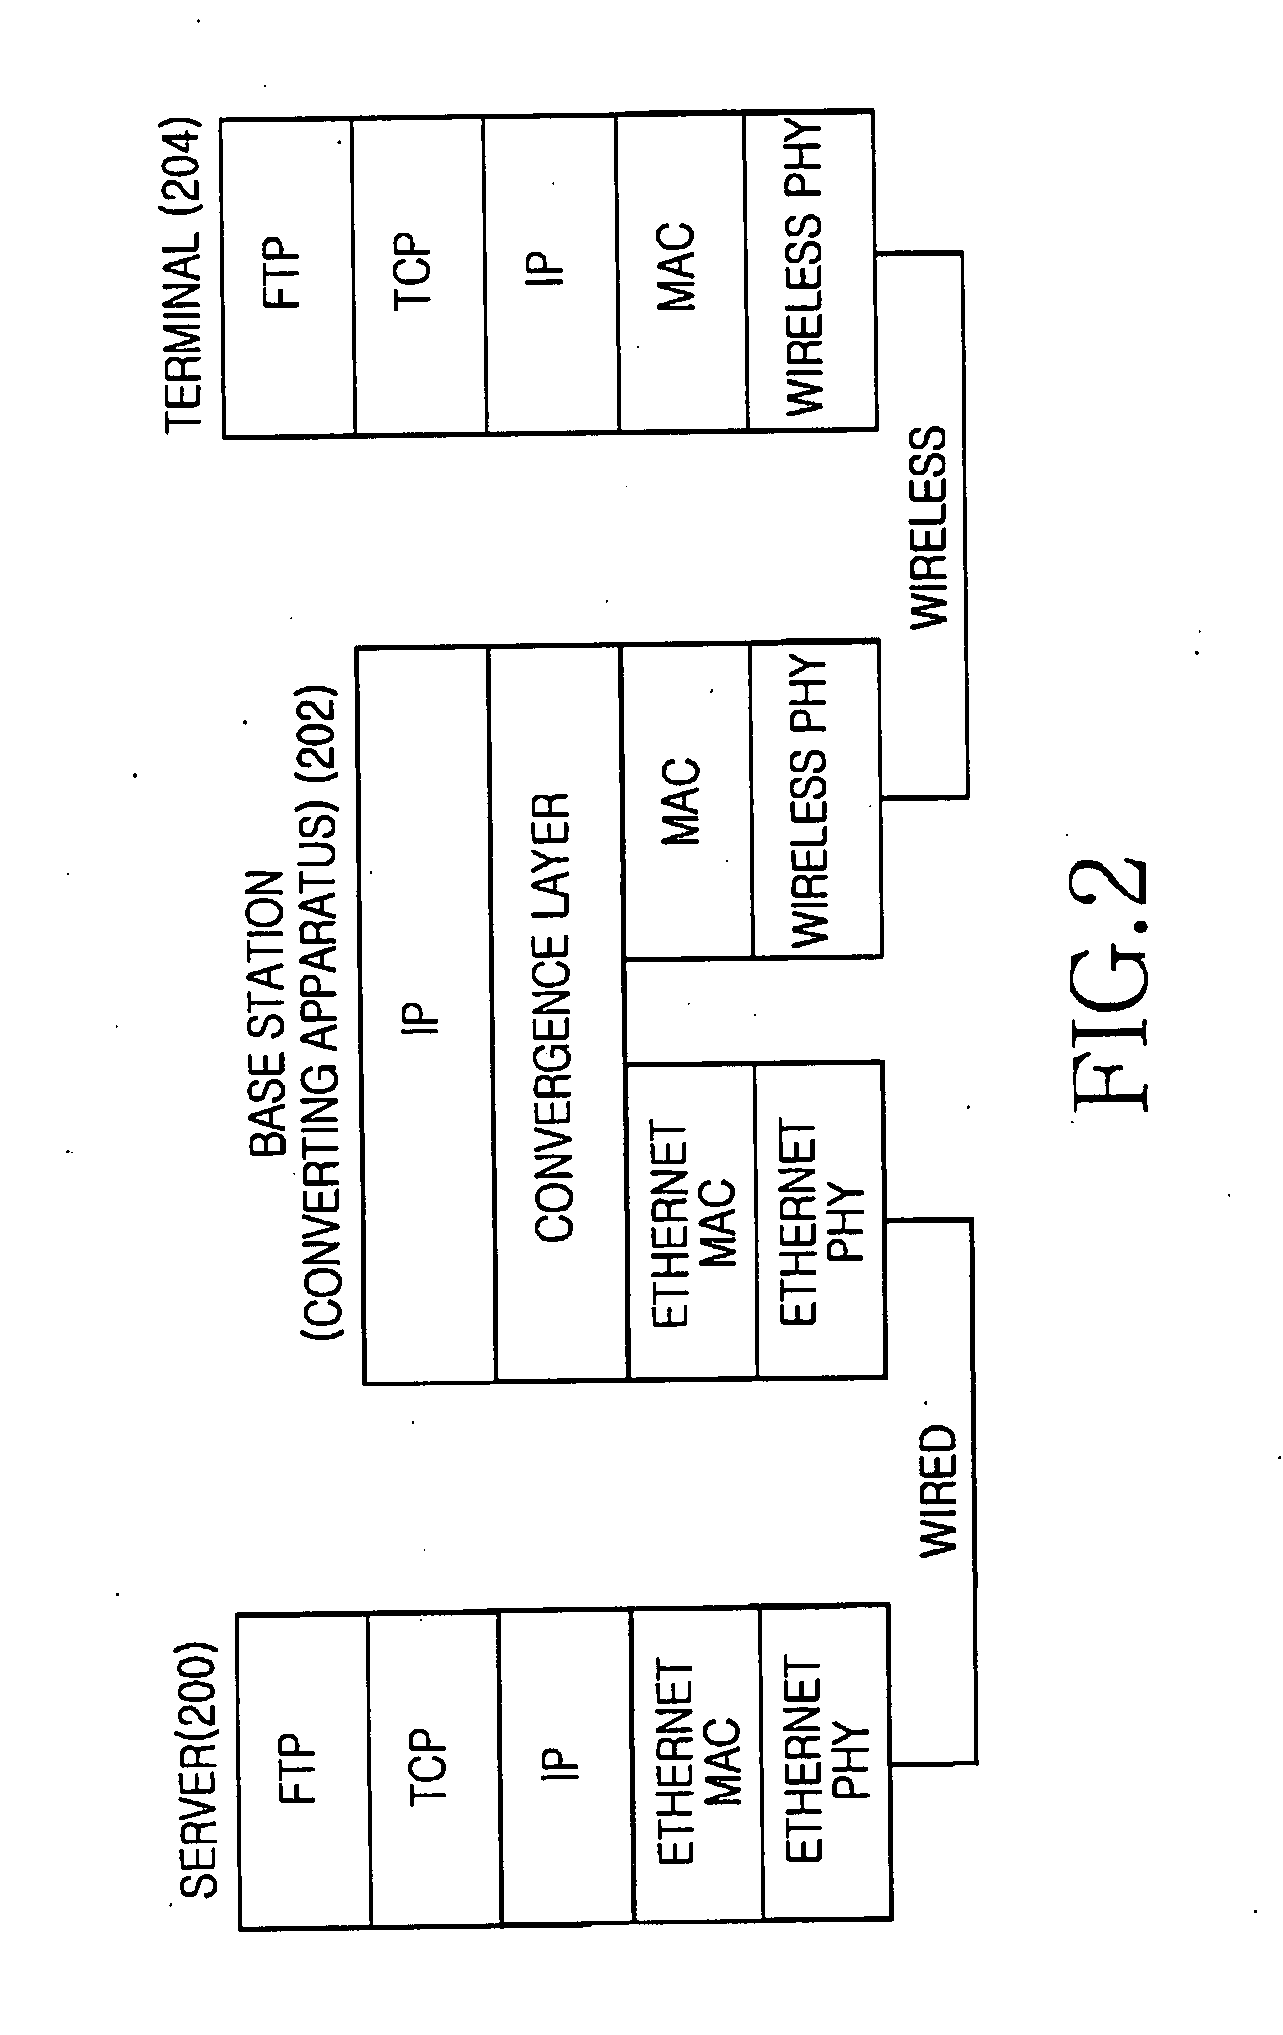 Apparatus and method for converting MAC frame in broadband wireless access (BWA) system